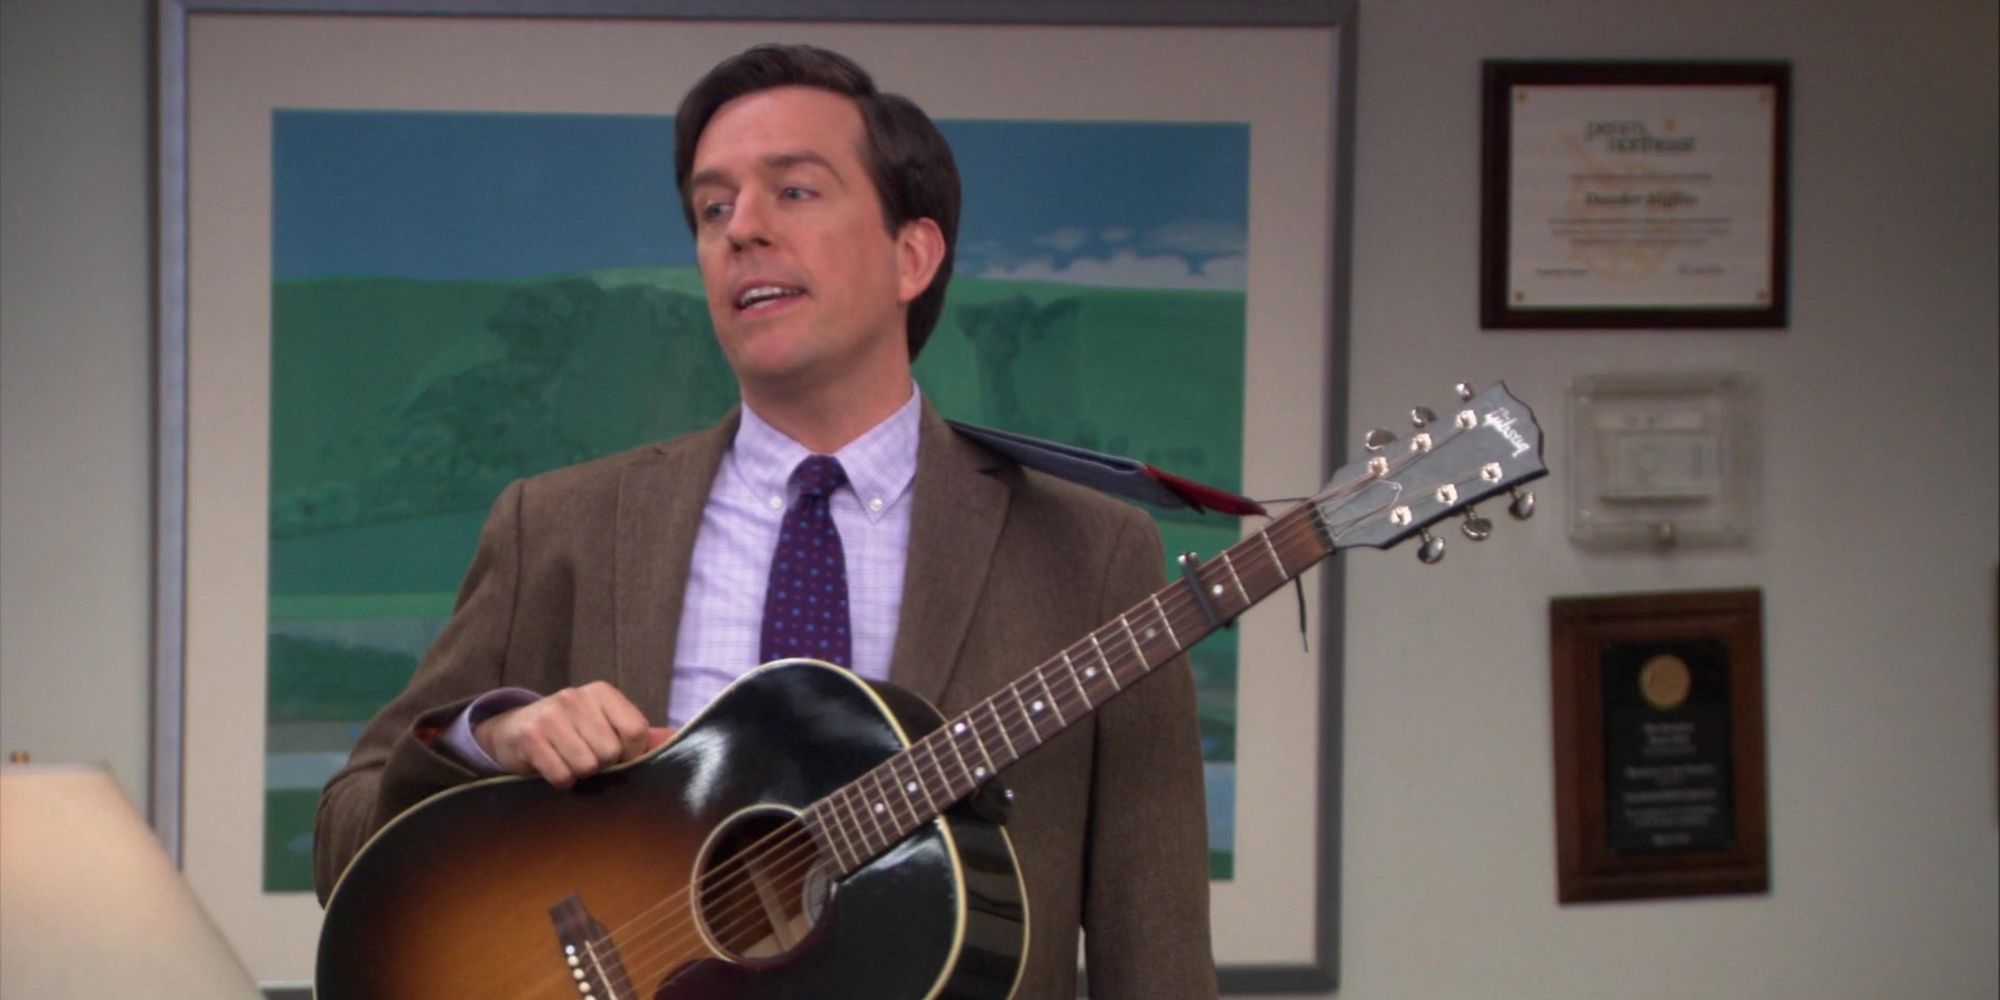 Andy Bernard plays guitar in The Office